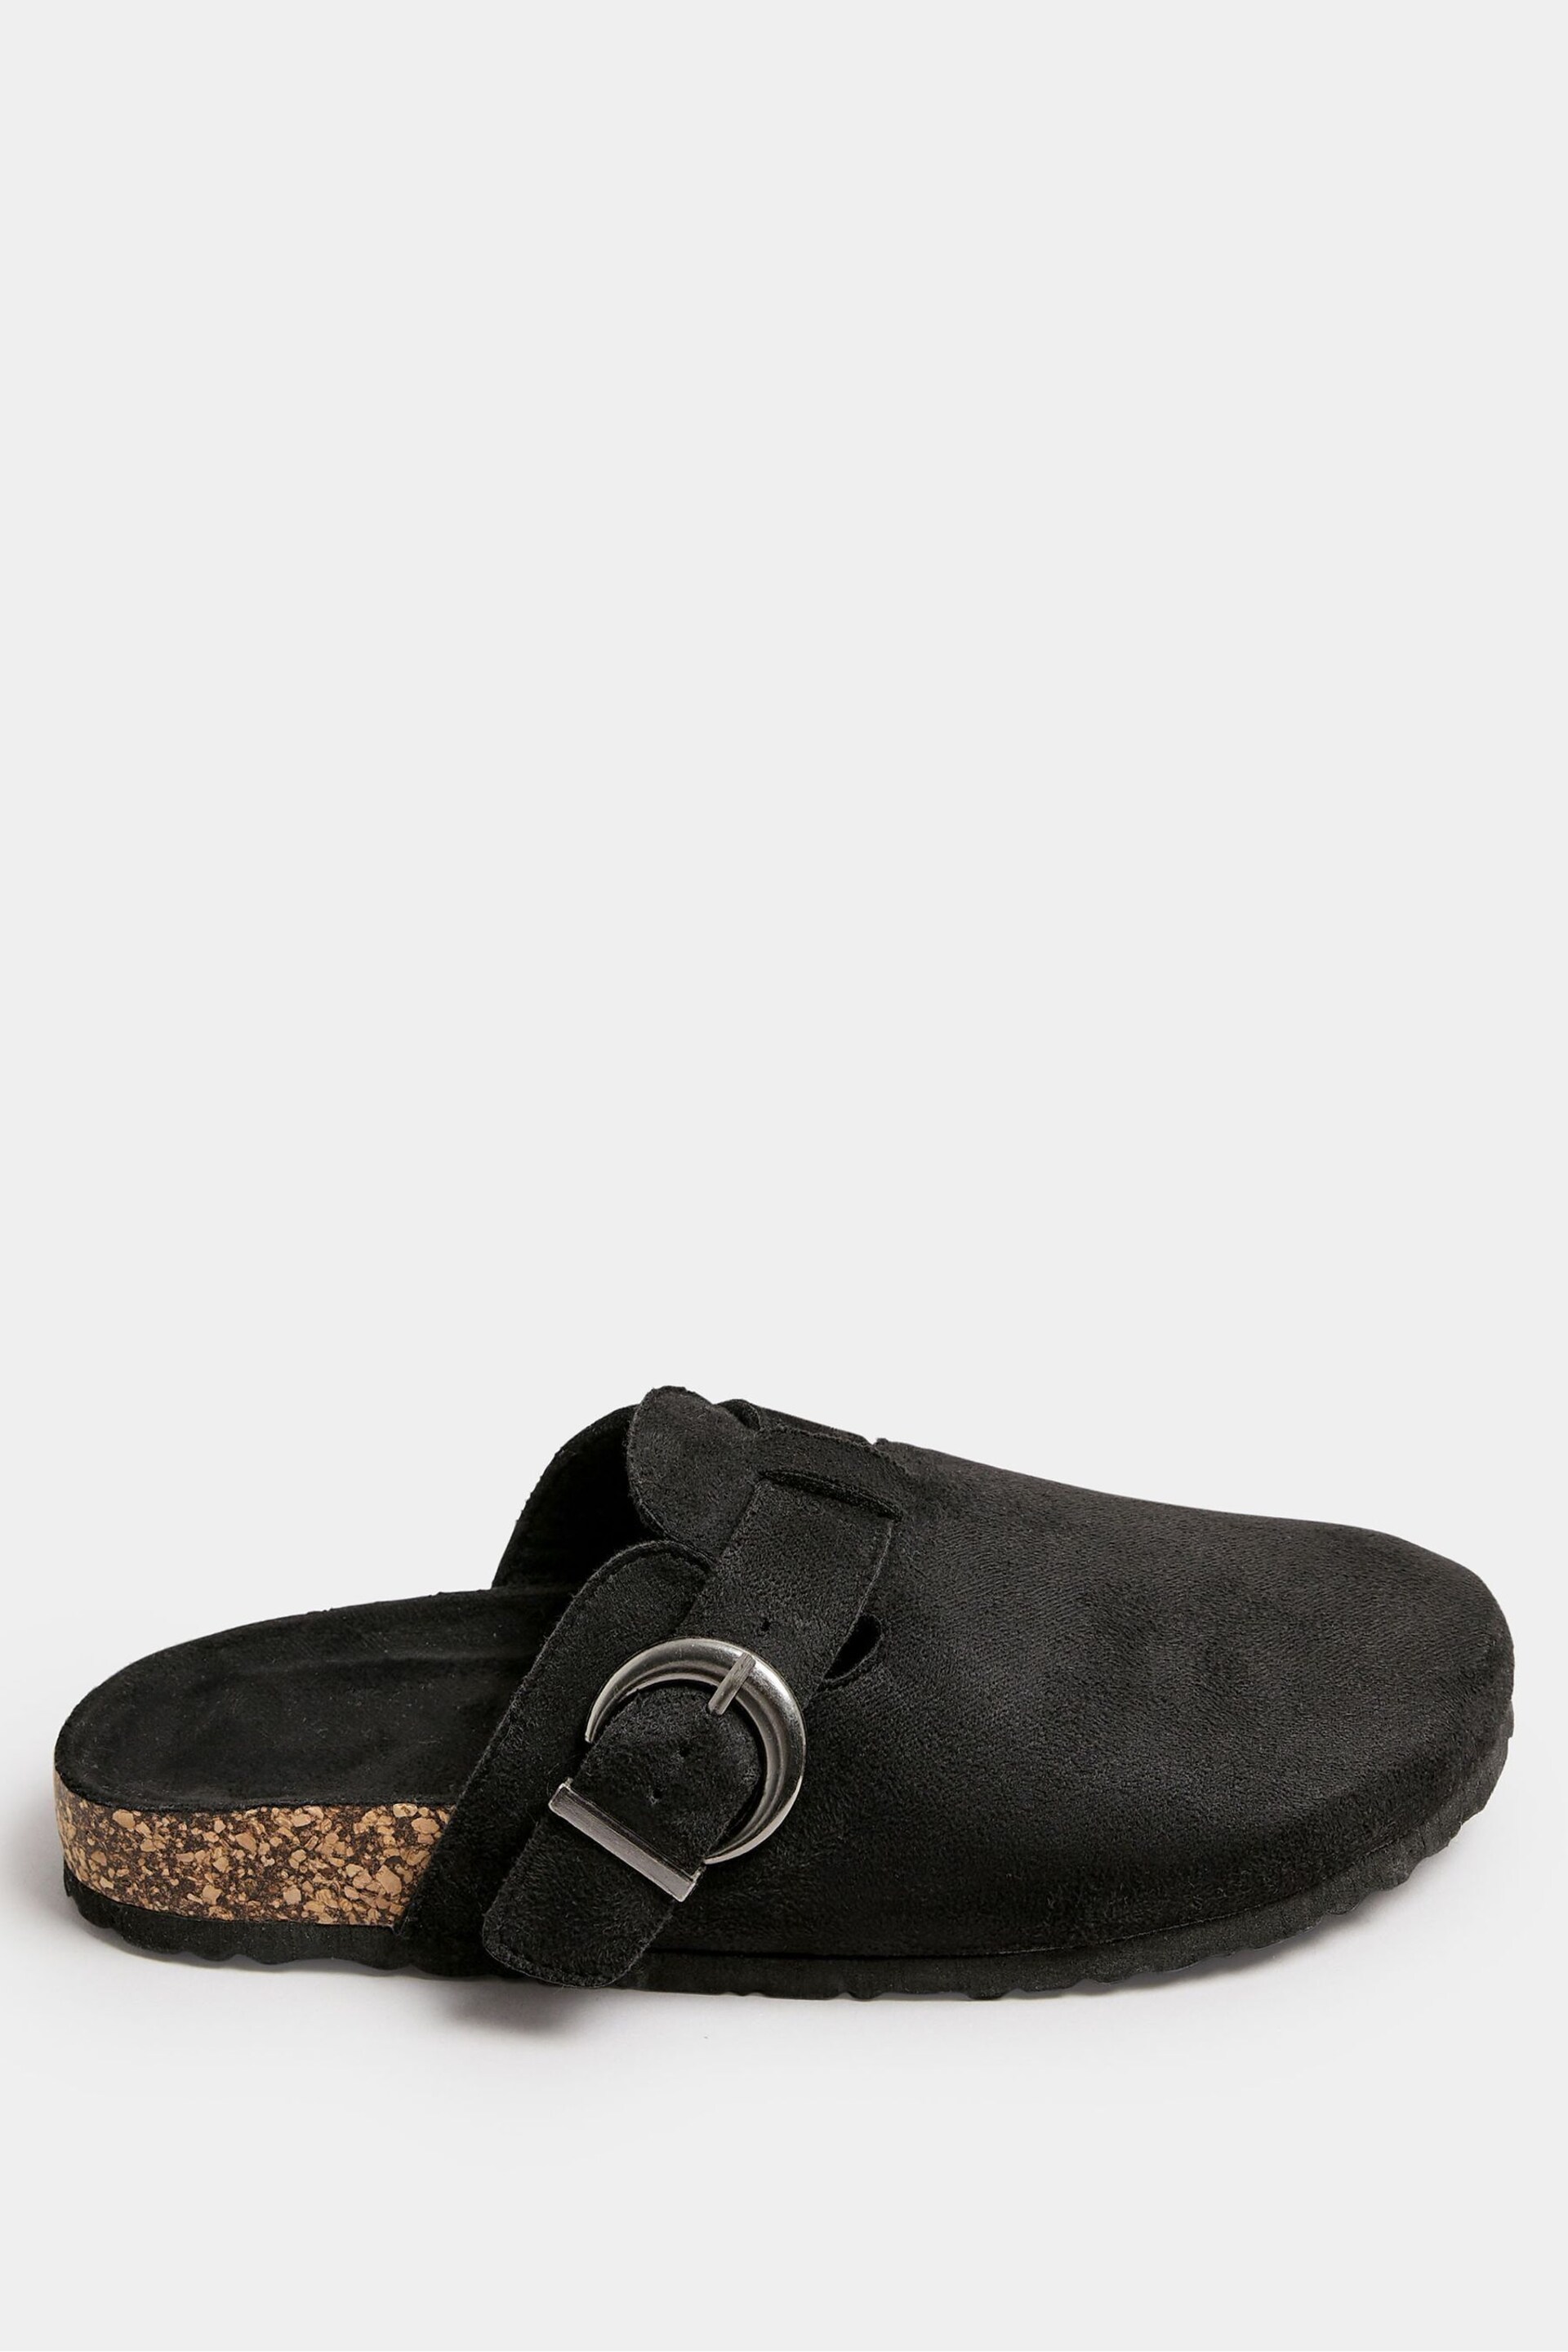 Yours Curve Black Faux Suede Clogs In Extra Wide EEE Fit - Image 2 of 5